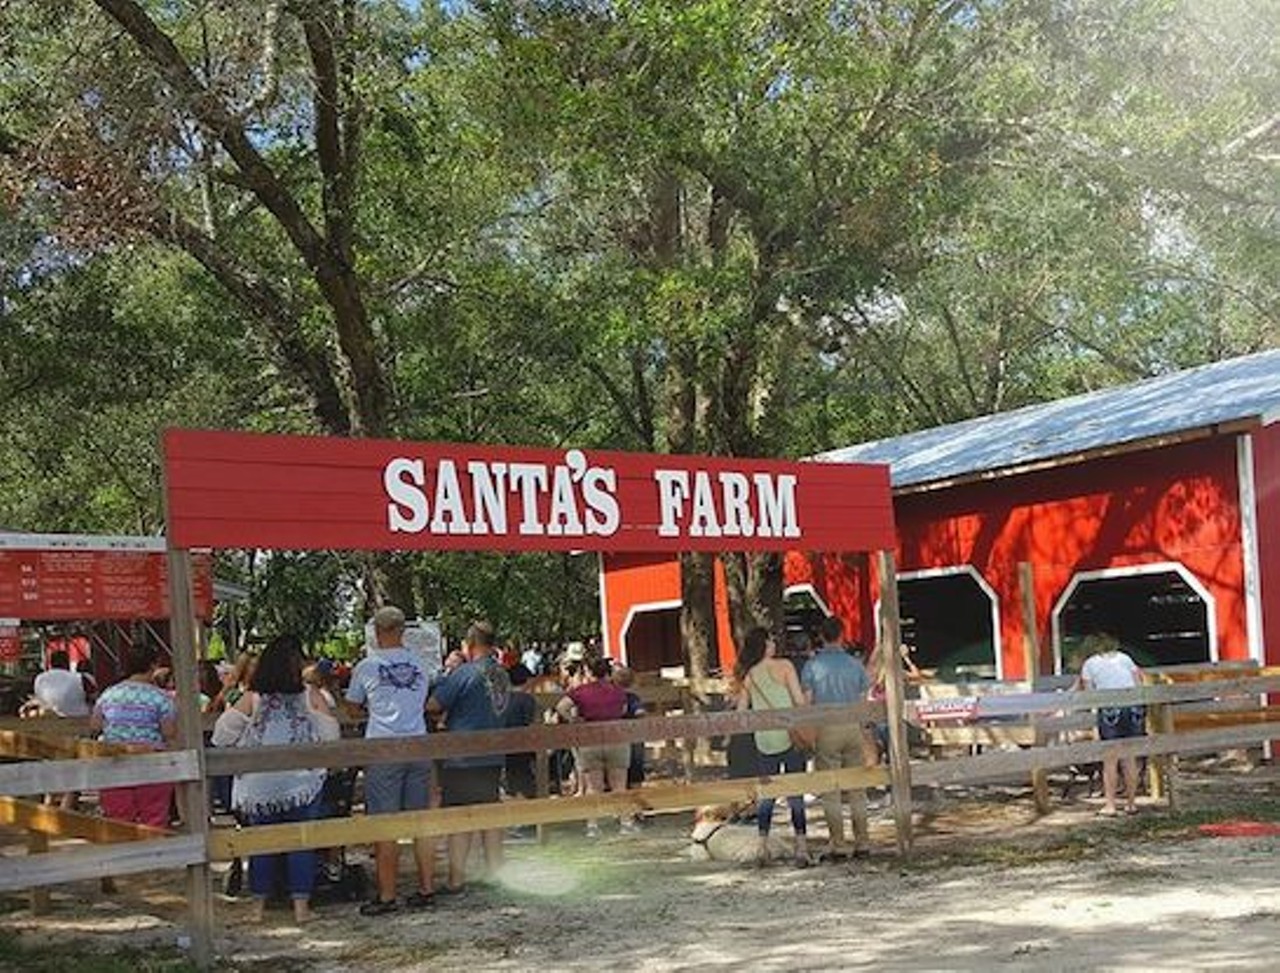 Cut your own tree at Santa&#146;s Christmas Tree Forest 
35317 Huff Rd, Eustis, FL
November 23 &#150; December 22
Although it&#146;s a bit of a drive from the Tampa area, making a family trek out to Santa&#146;s Christmas Tree Forest is a must this season. The closest thing to a literal winter wonderland in Florida, this destination features hayrides, holiday-themed photo ops, horse rides , corn mazes, zip-lining, a petting zoo, and of course, choosing your own fresh Christmas tree. Get your tickets now, they always sell out.
Photo via Santa&#146;s Farm/Facebook